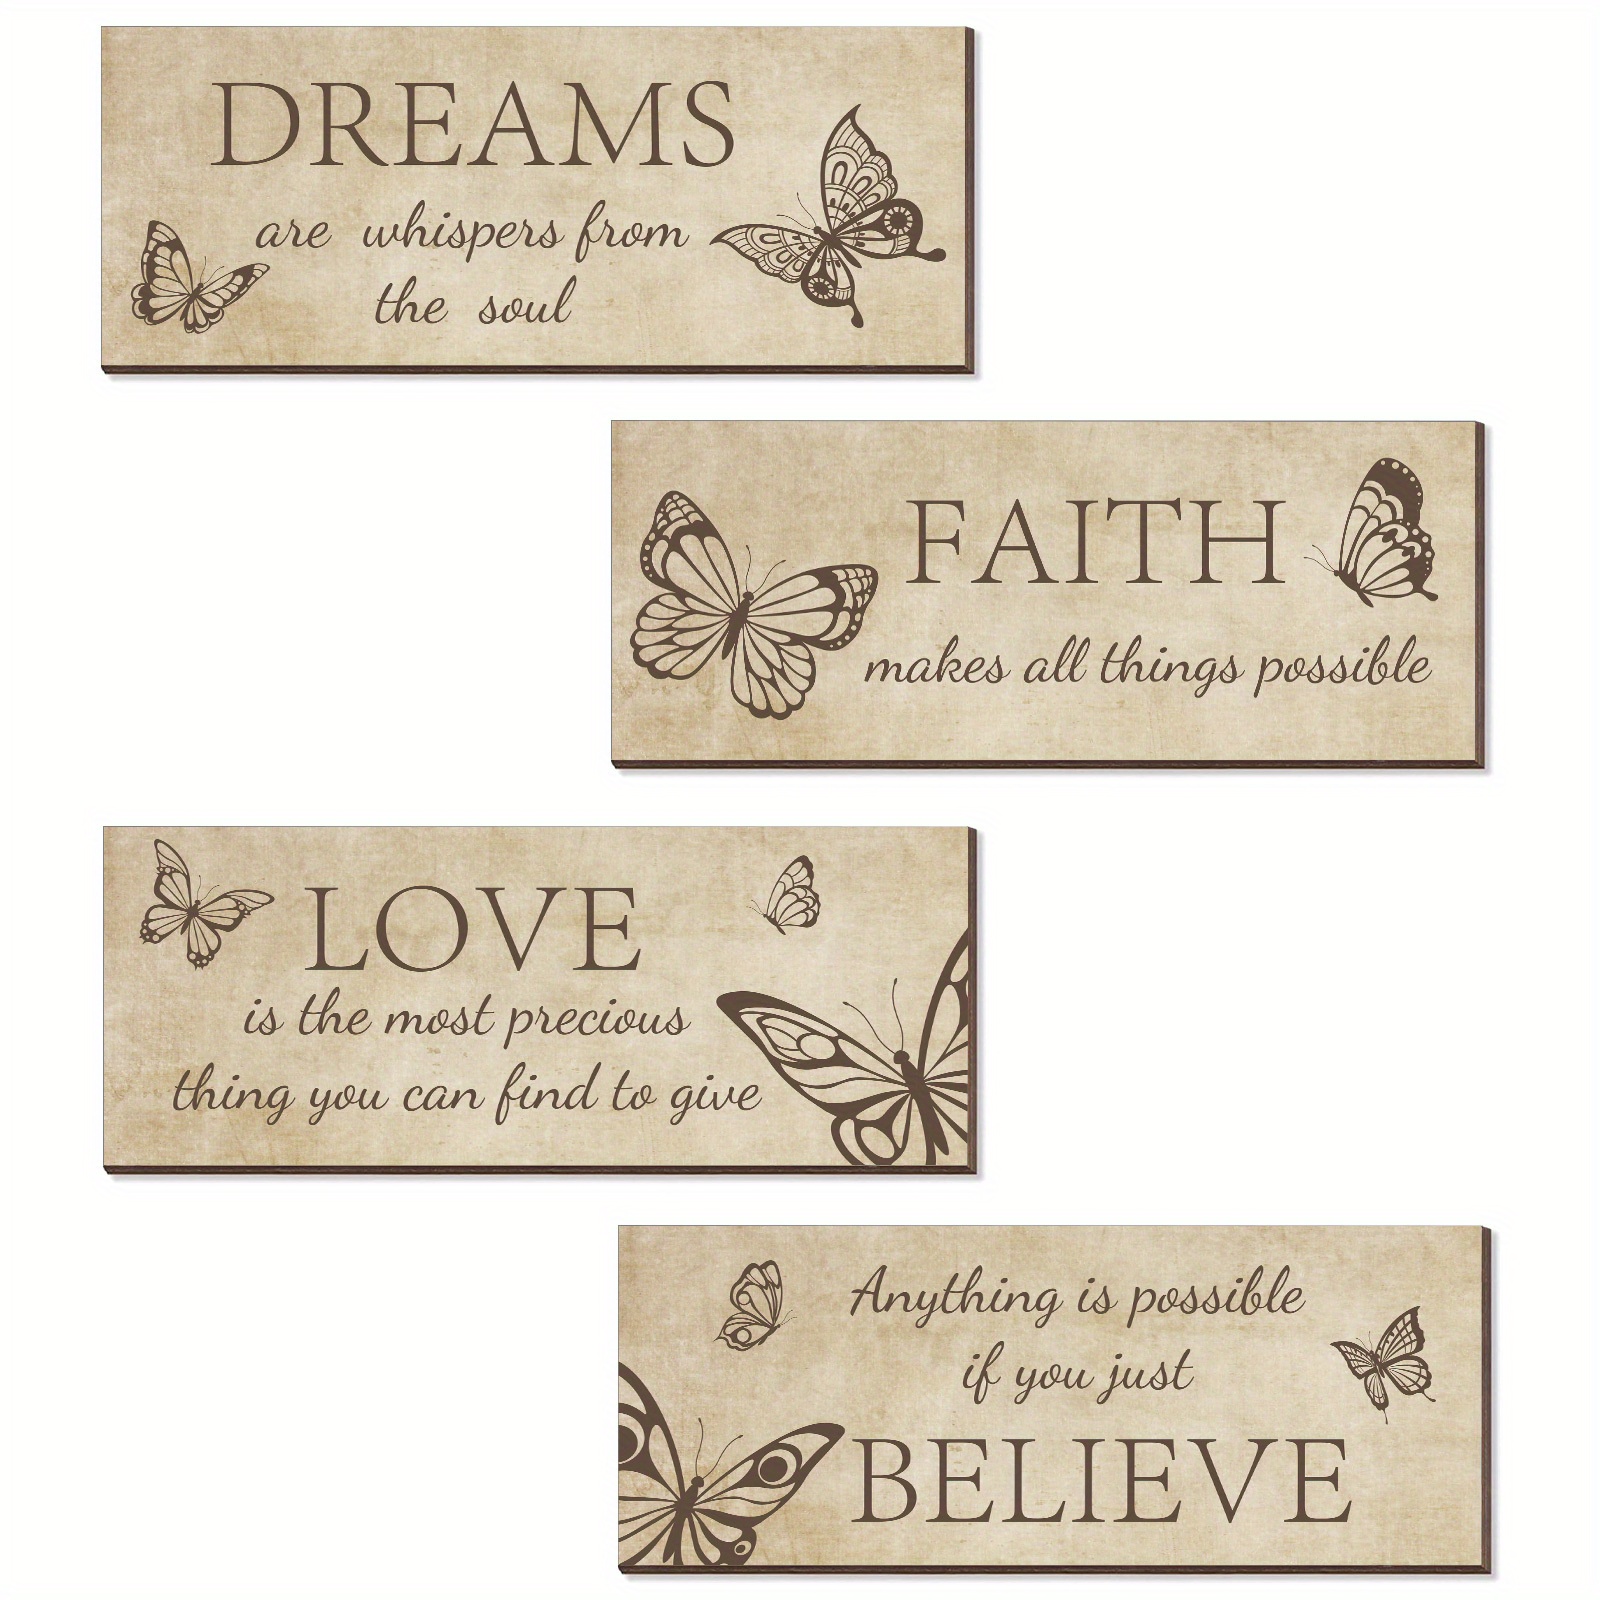 

4pcs Personalized Bathroom Wall Decor Inspirational Quote Wooden Sign Love Faith Believe Dream White And Gold Wall Decor Wall Art Decor Signs For Living Room Bathroom